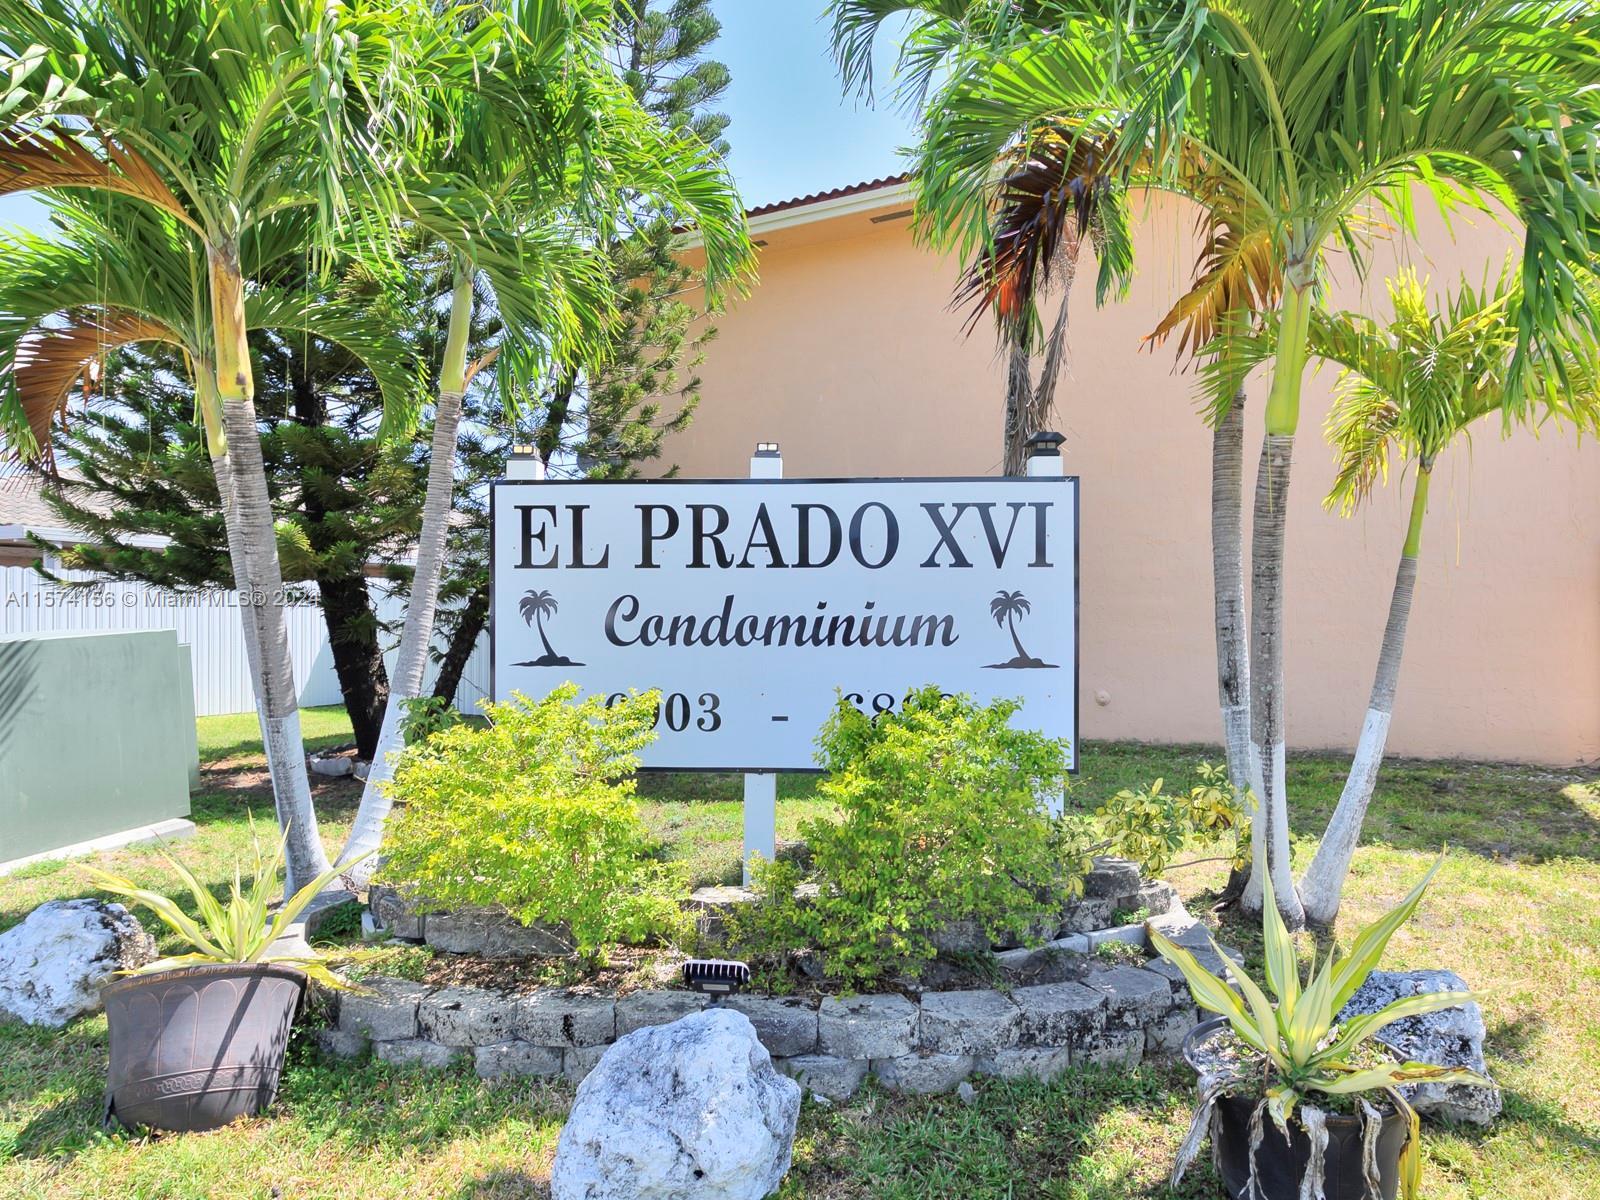 RARE GROUND FLOOR UNIT 2 BEDS/2 BATHS CENTRALLY LOCATED IN HIALEAH GARDENS. WALKING DISTANCE TO HIAL